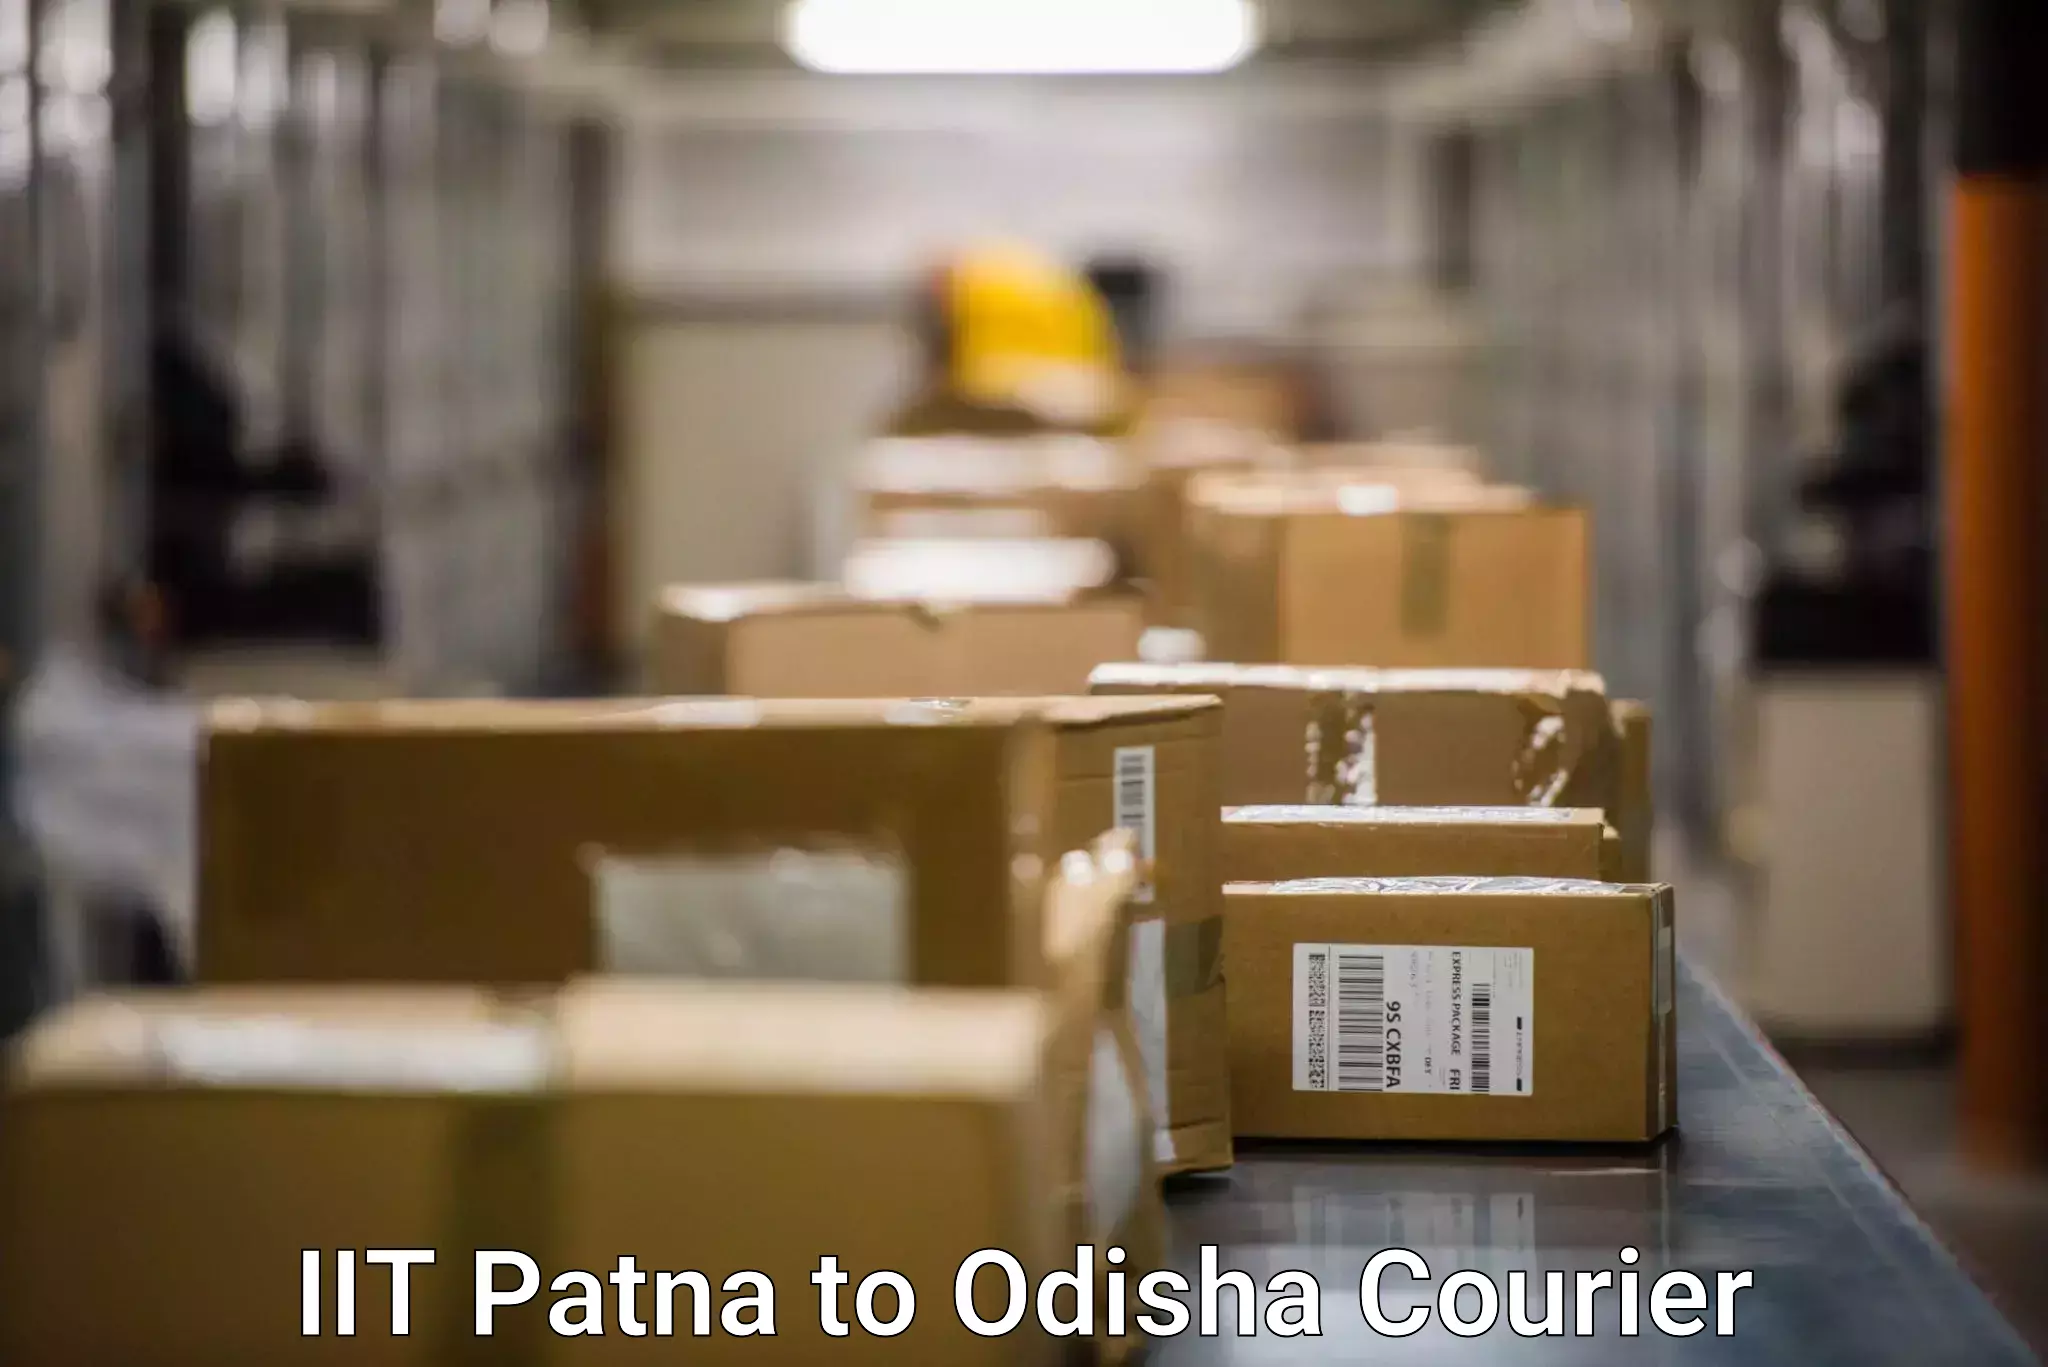 Express delivery network IIT Patna to Agarpada